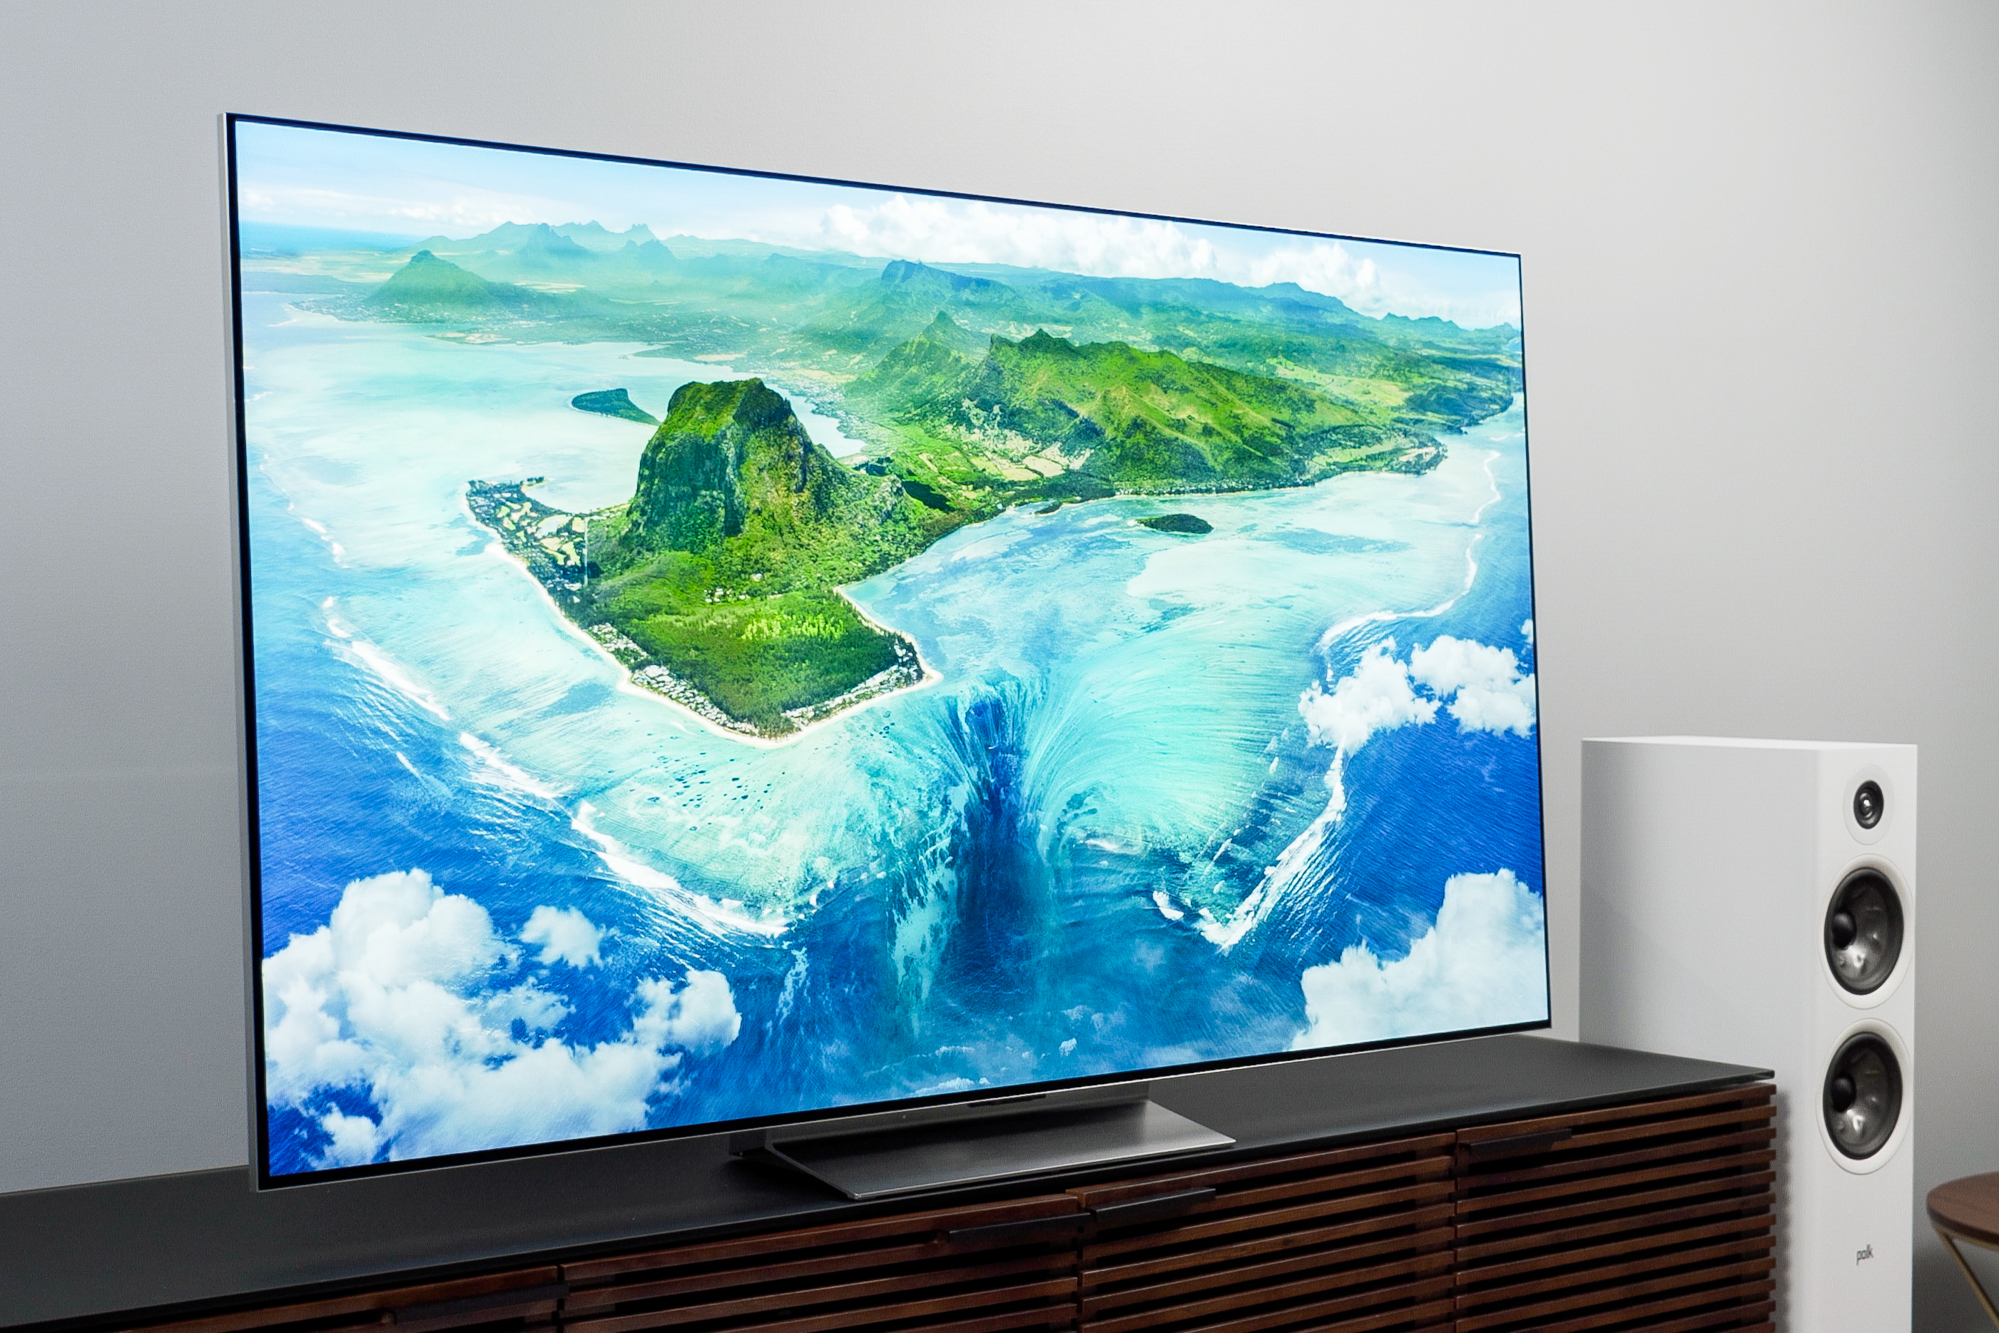 LG G2 OLED TV review: a truly elevated OLED TV